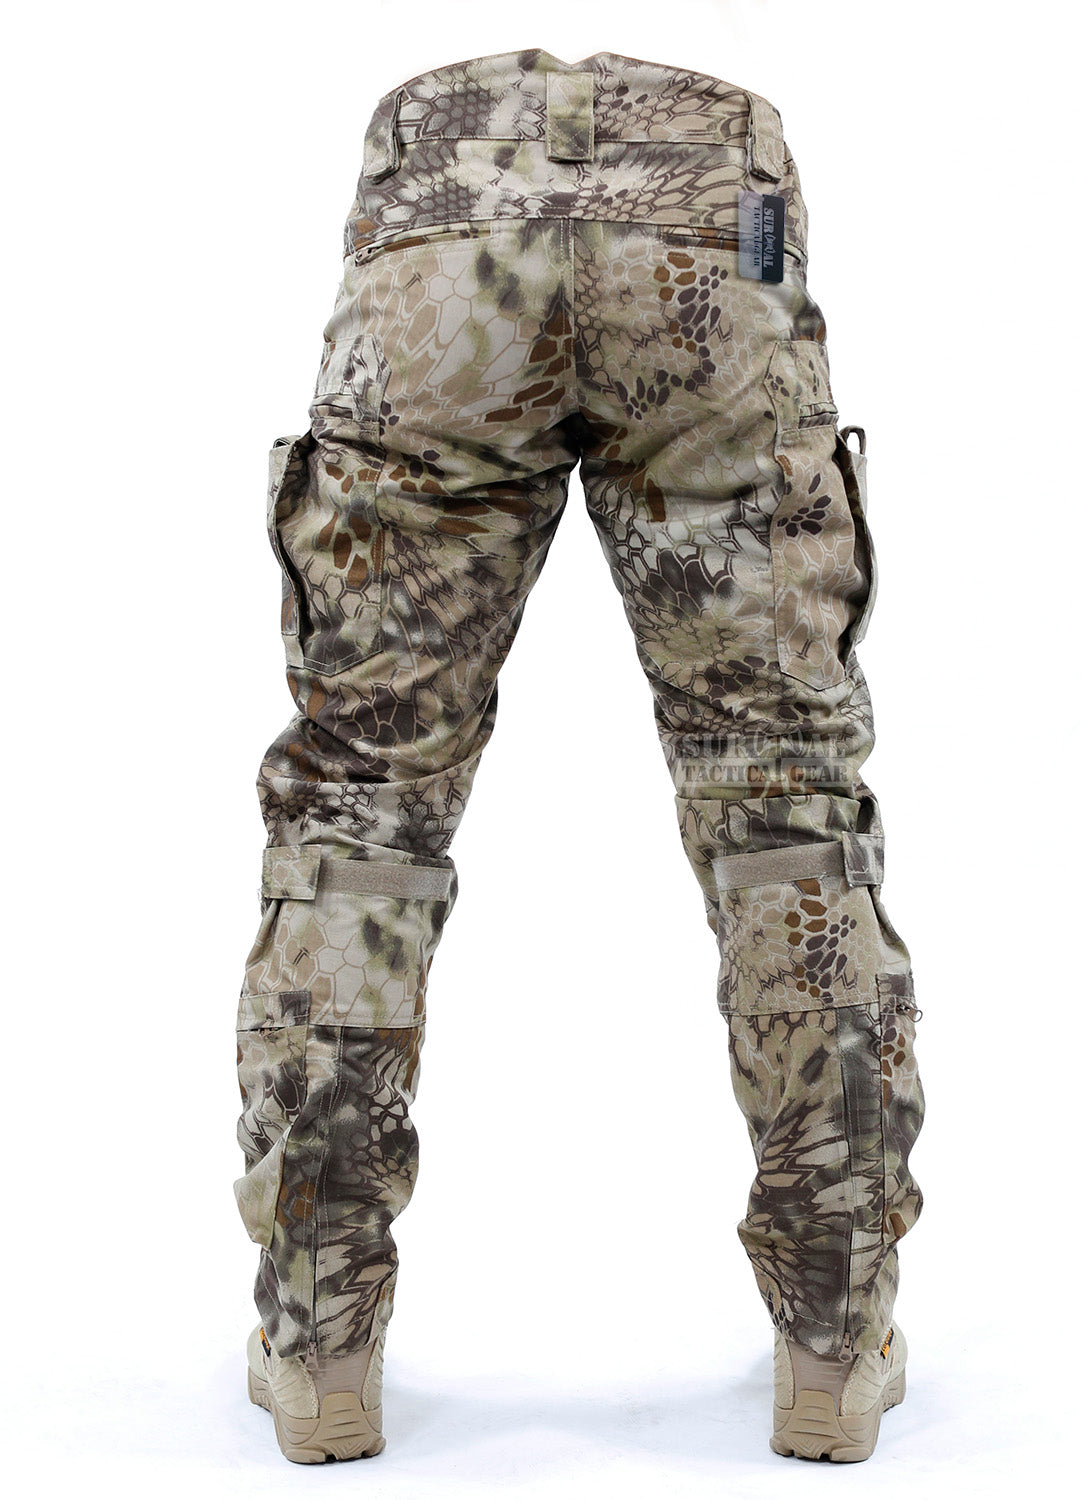 Tactical Pants with Knee Protection System & Air Circulation System